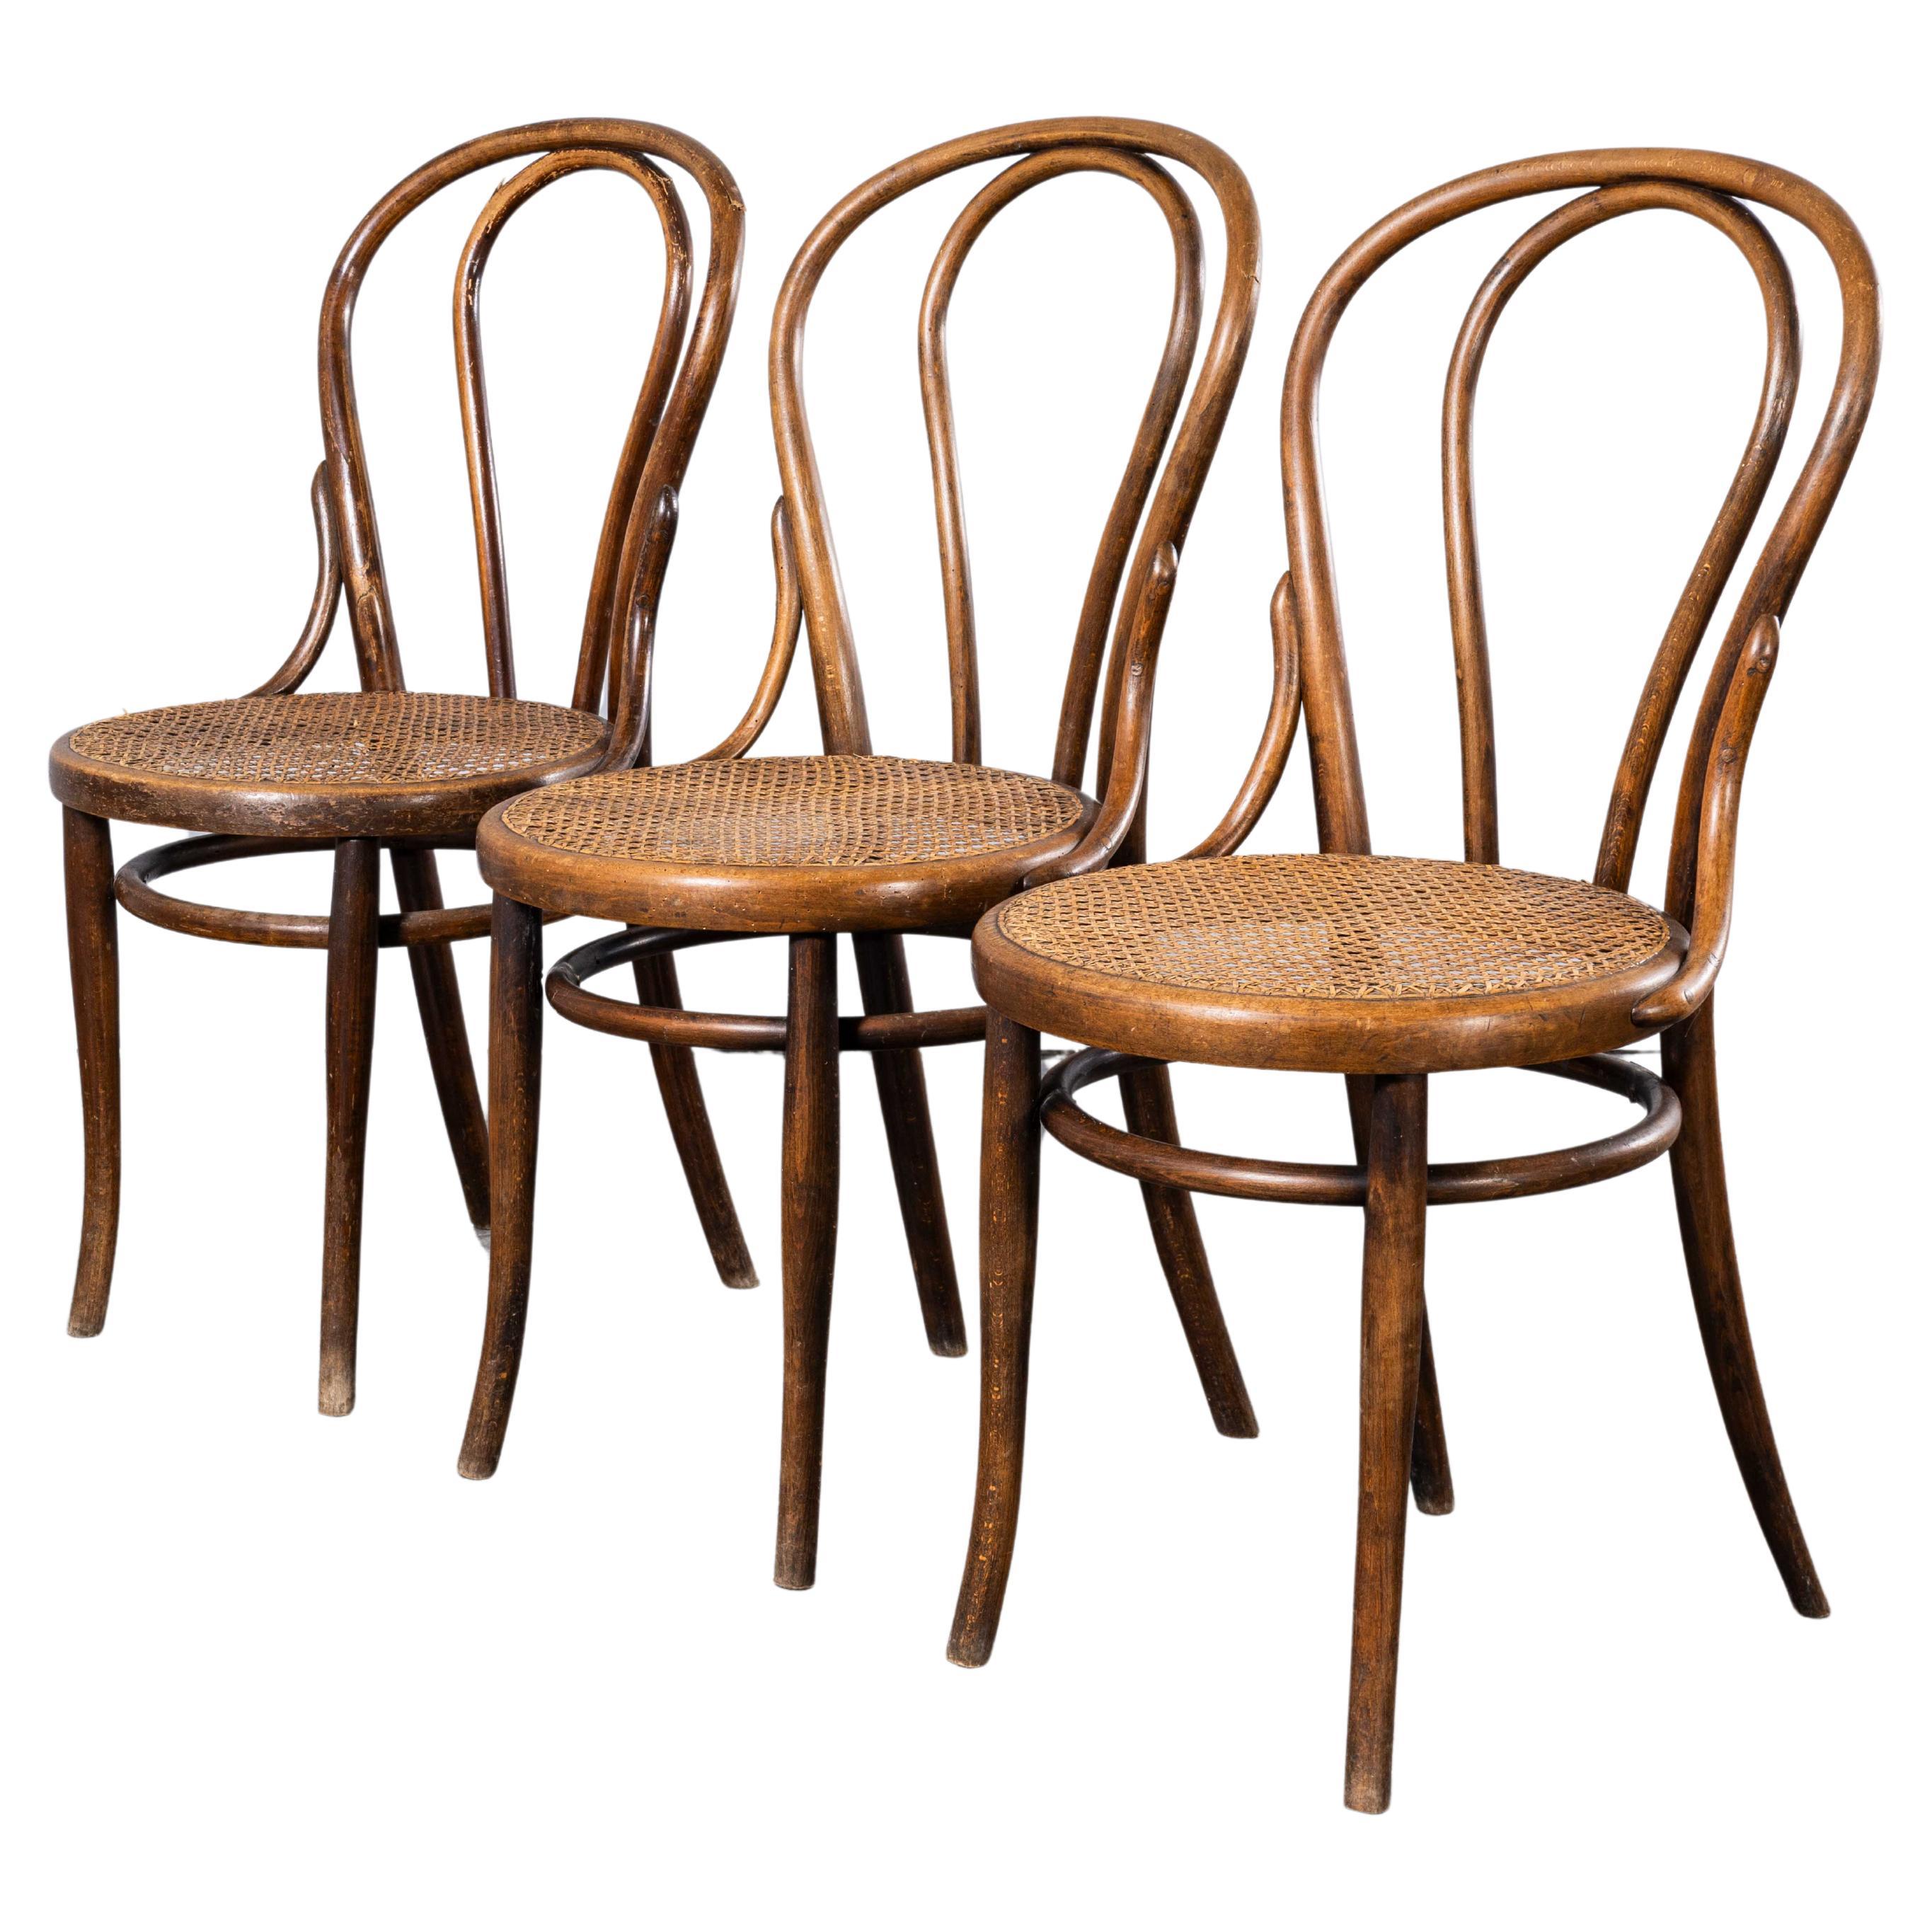 1940's Fischel Hoop Backed Cane Seat Chair - Set Of Three